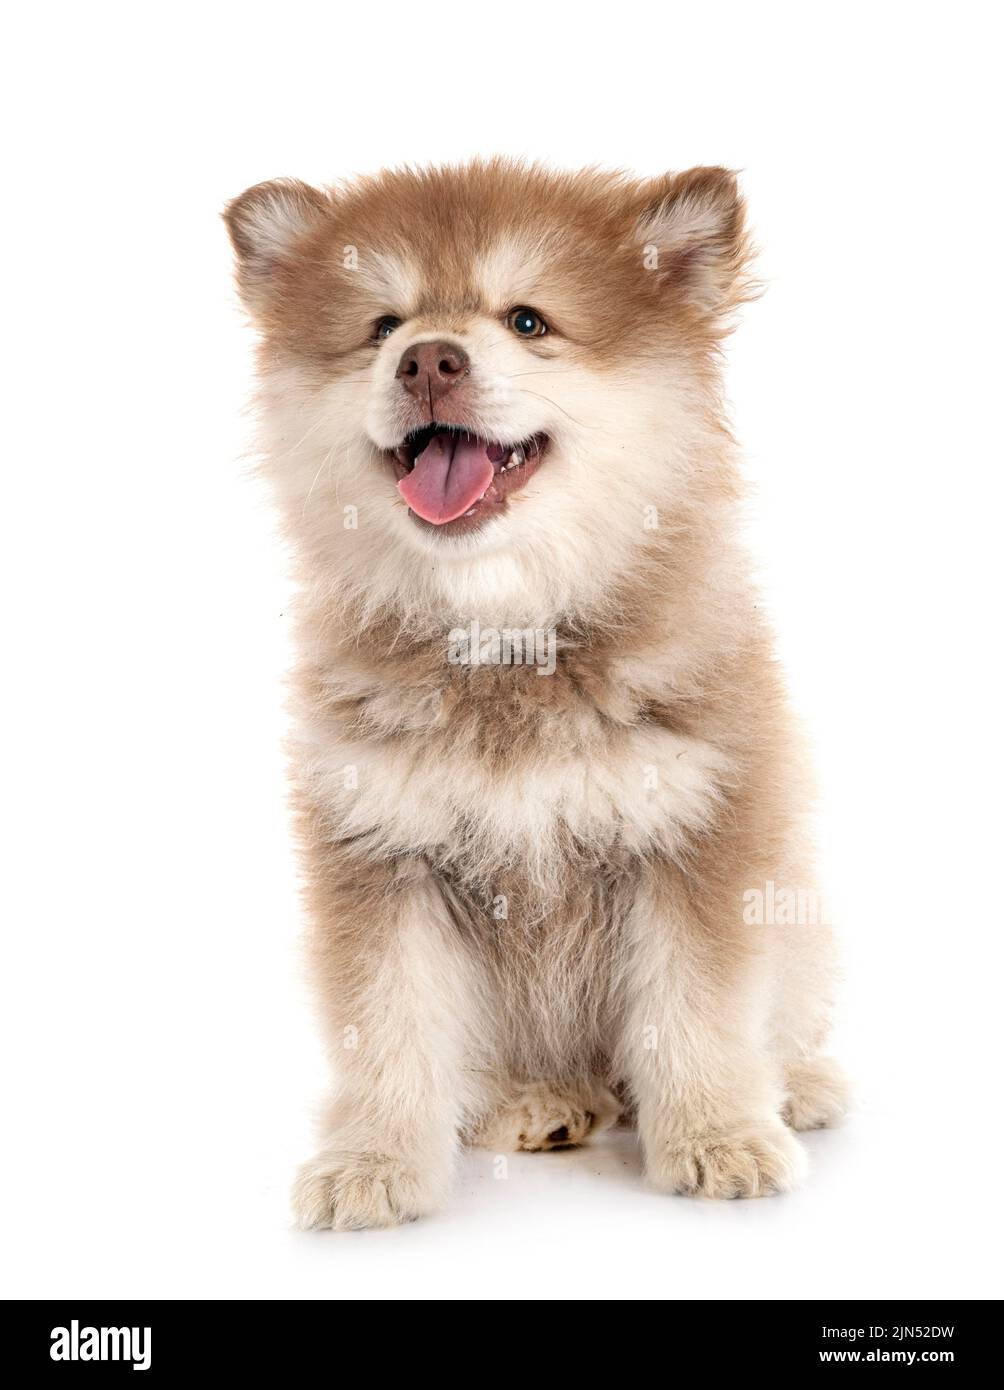 puppy Finnish Lapphund in front of white background Stock Photo